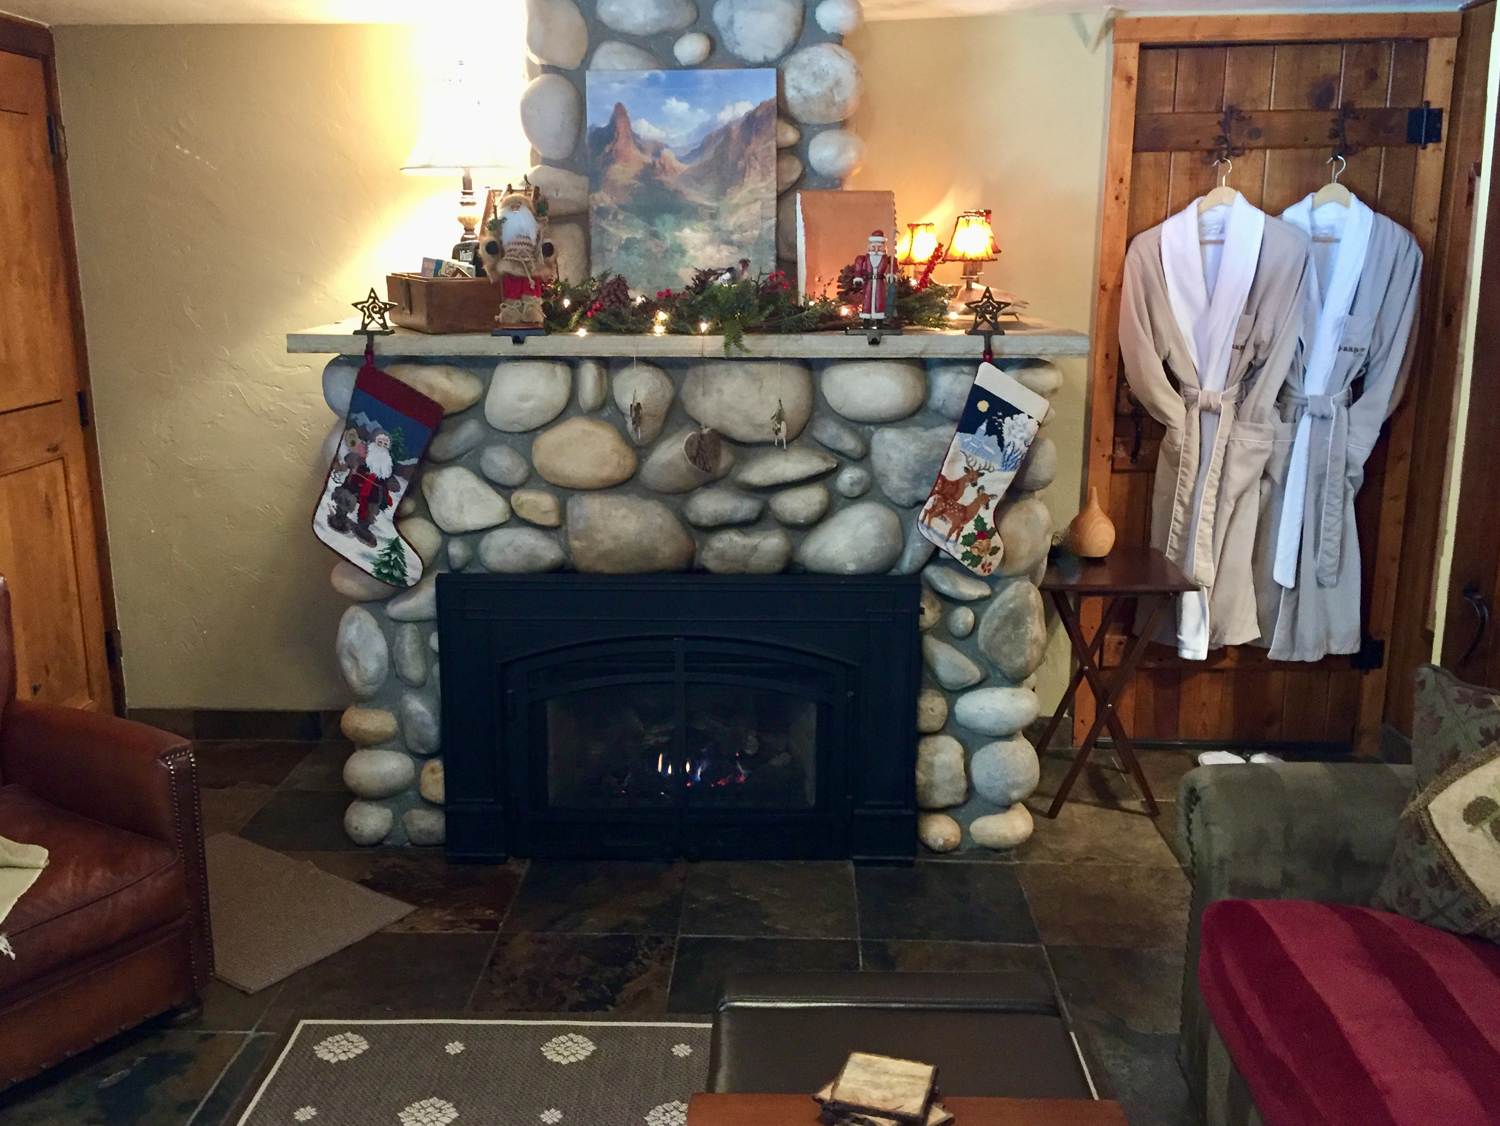 Riverview fireplace stockings